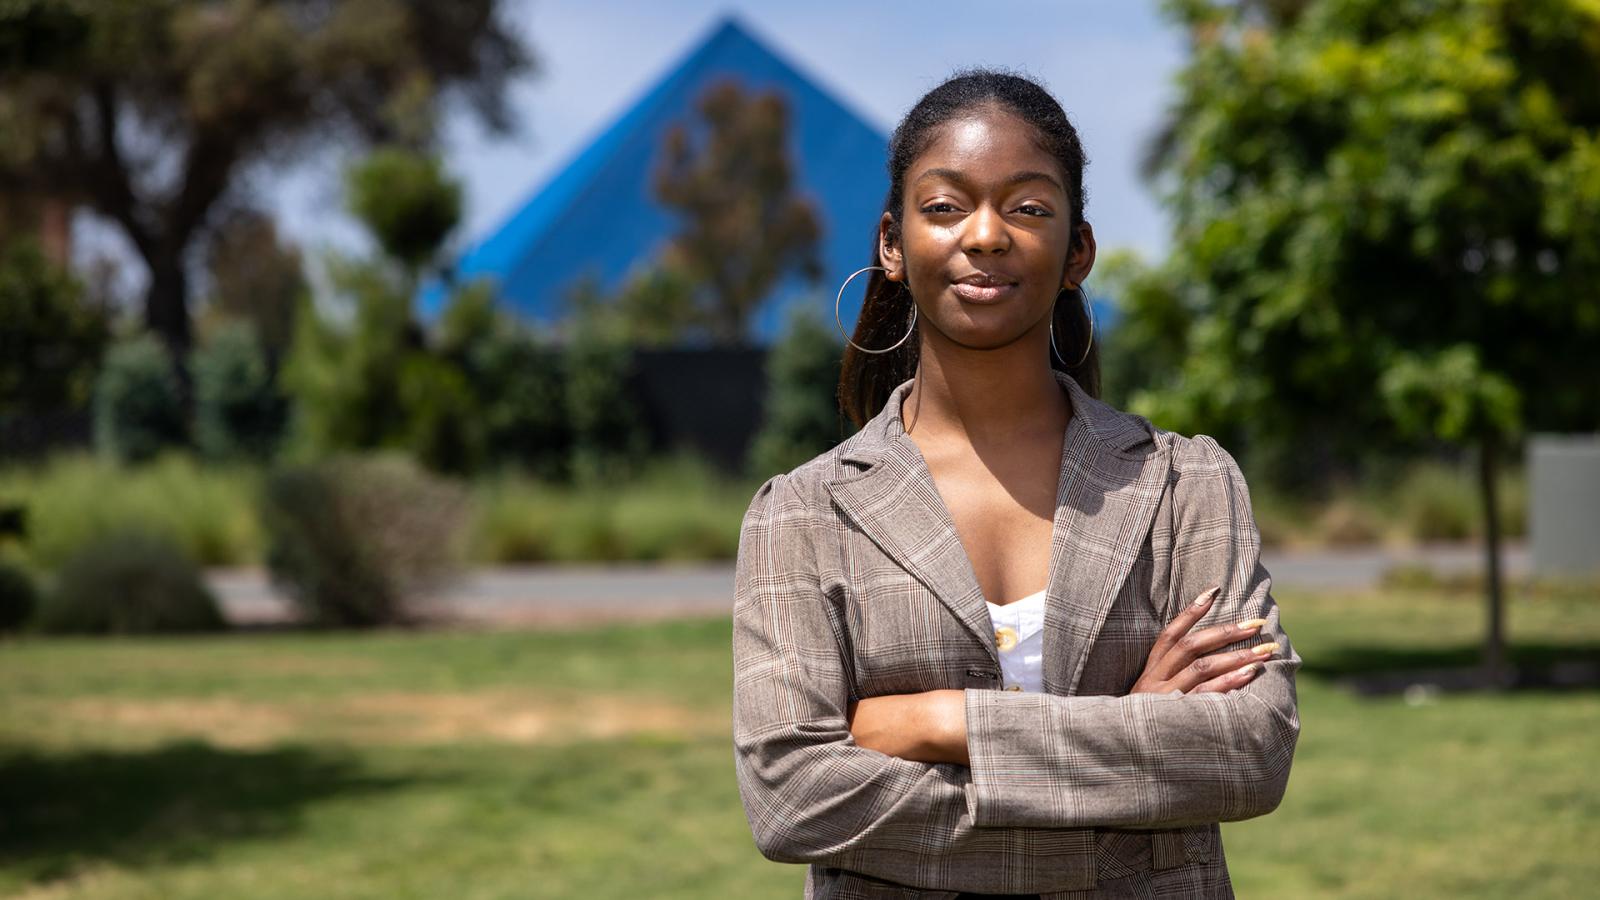 Student Chloe Thomas, an inaugural recipient of the Black Student Success Scholarship, with Walter Pyramid in background